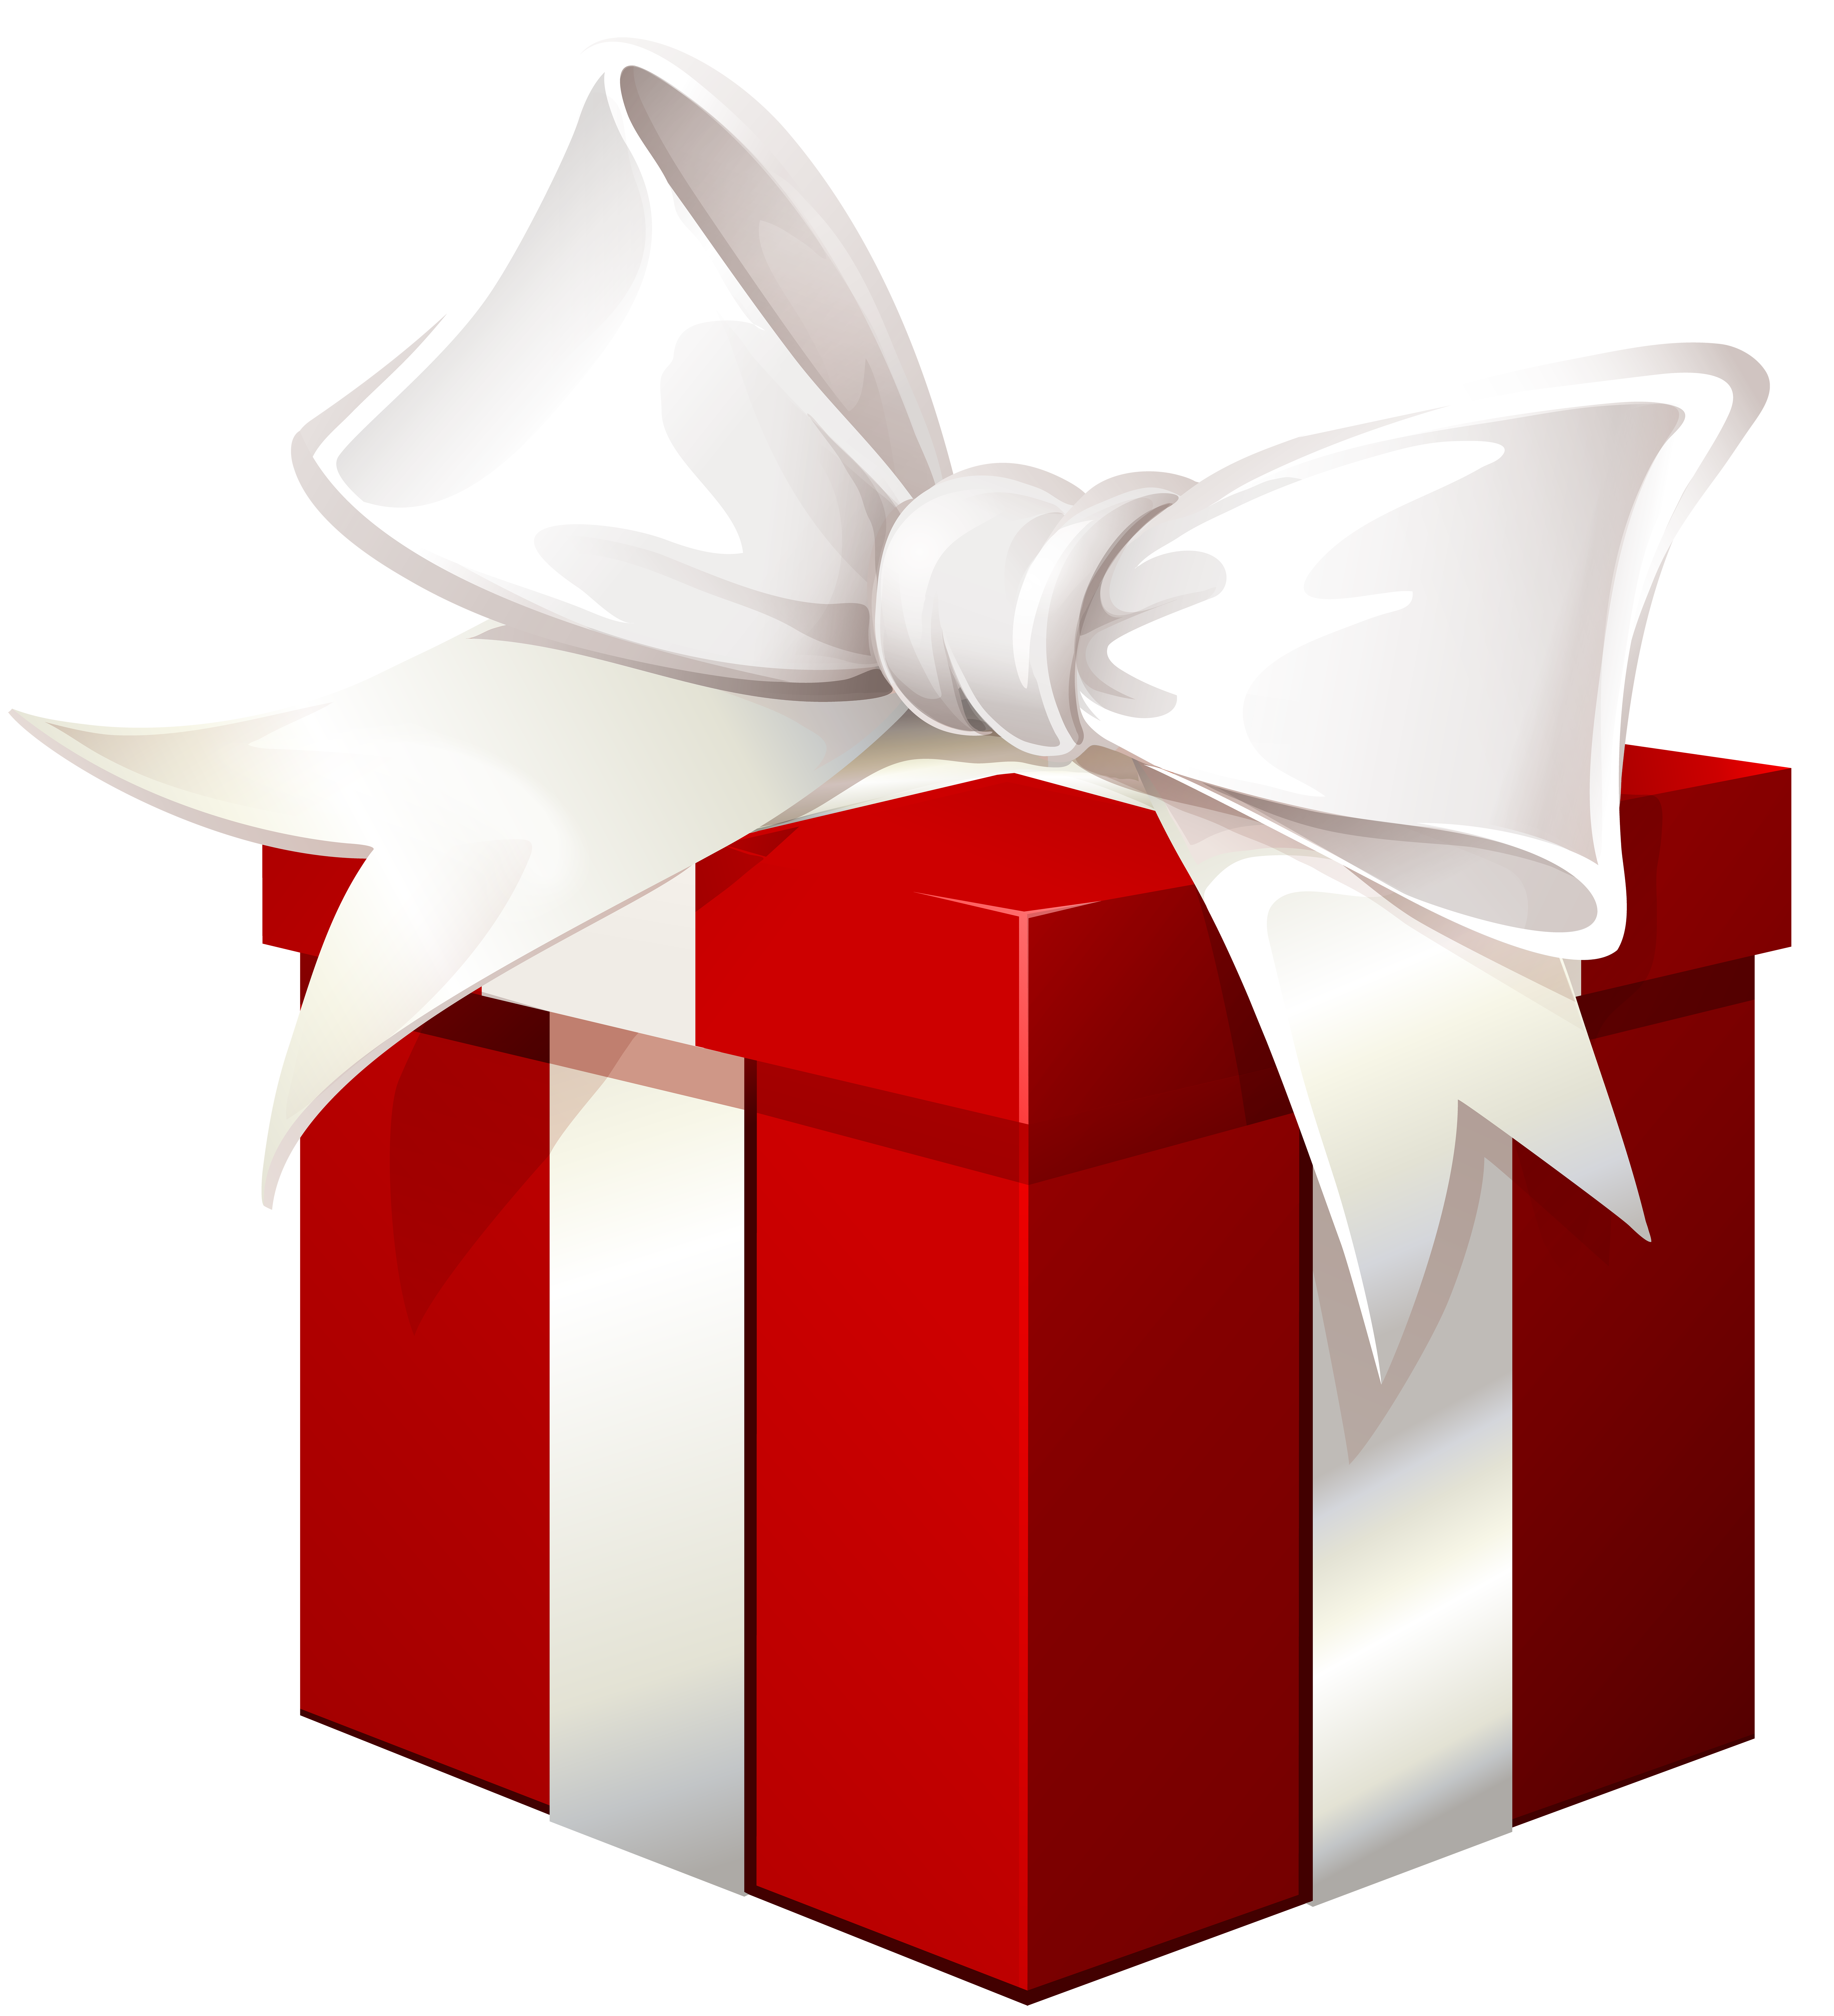 Red Gift Box with White Bow Transparent PNG Image | Gallery ...